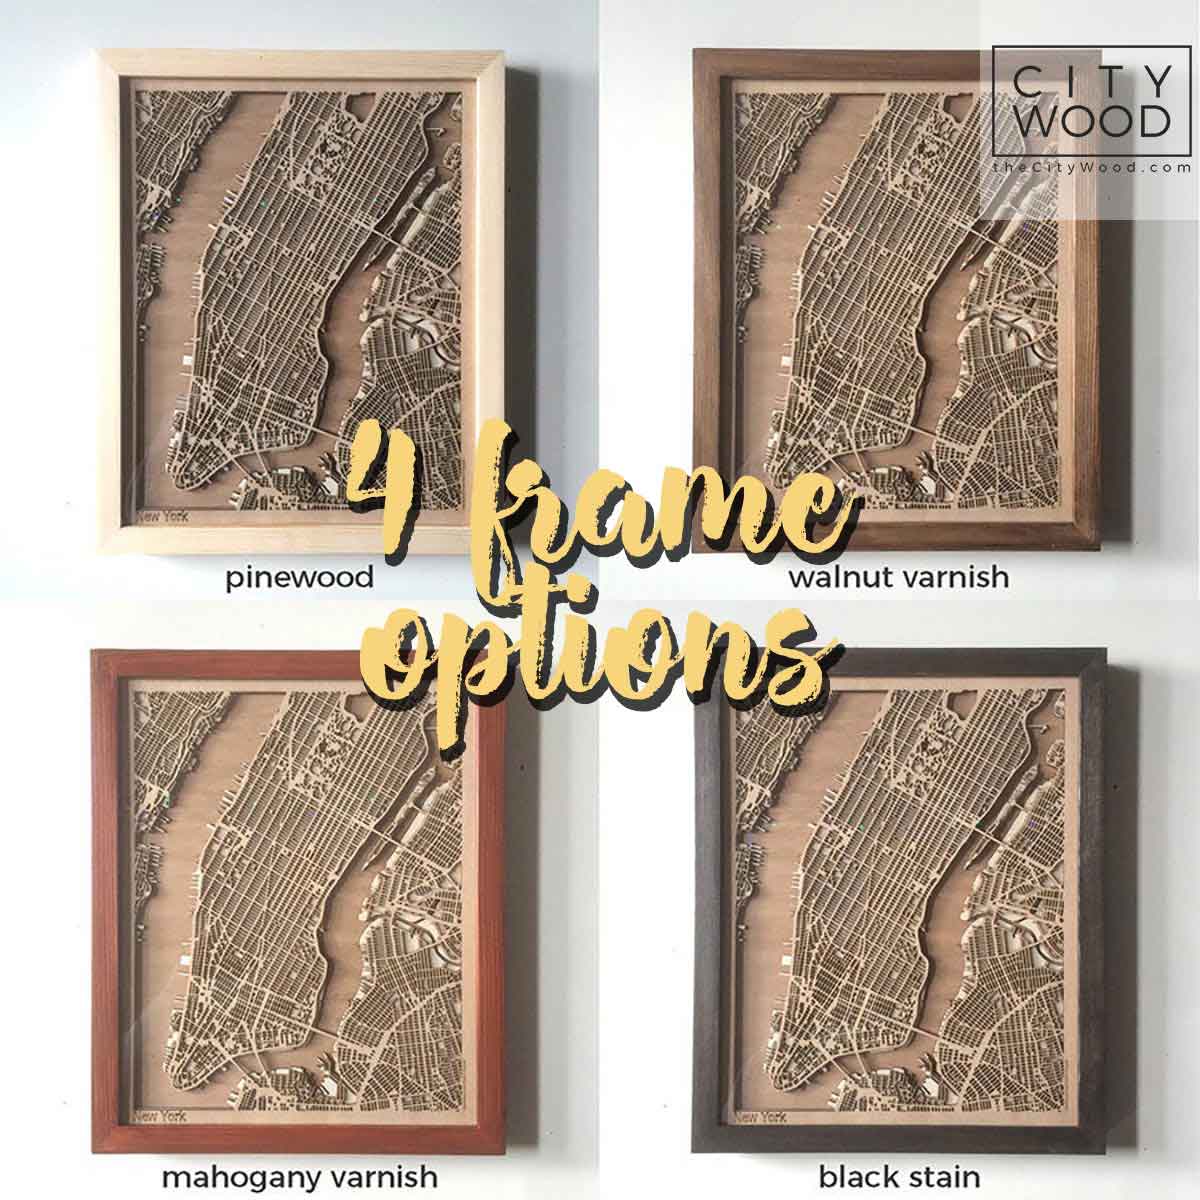 Island Wooden Map by CityWood - Custom Wood Map Art - Unique Laser Cut Engraved - Anniversary Gift